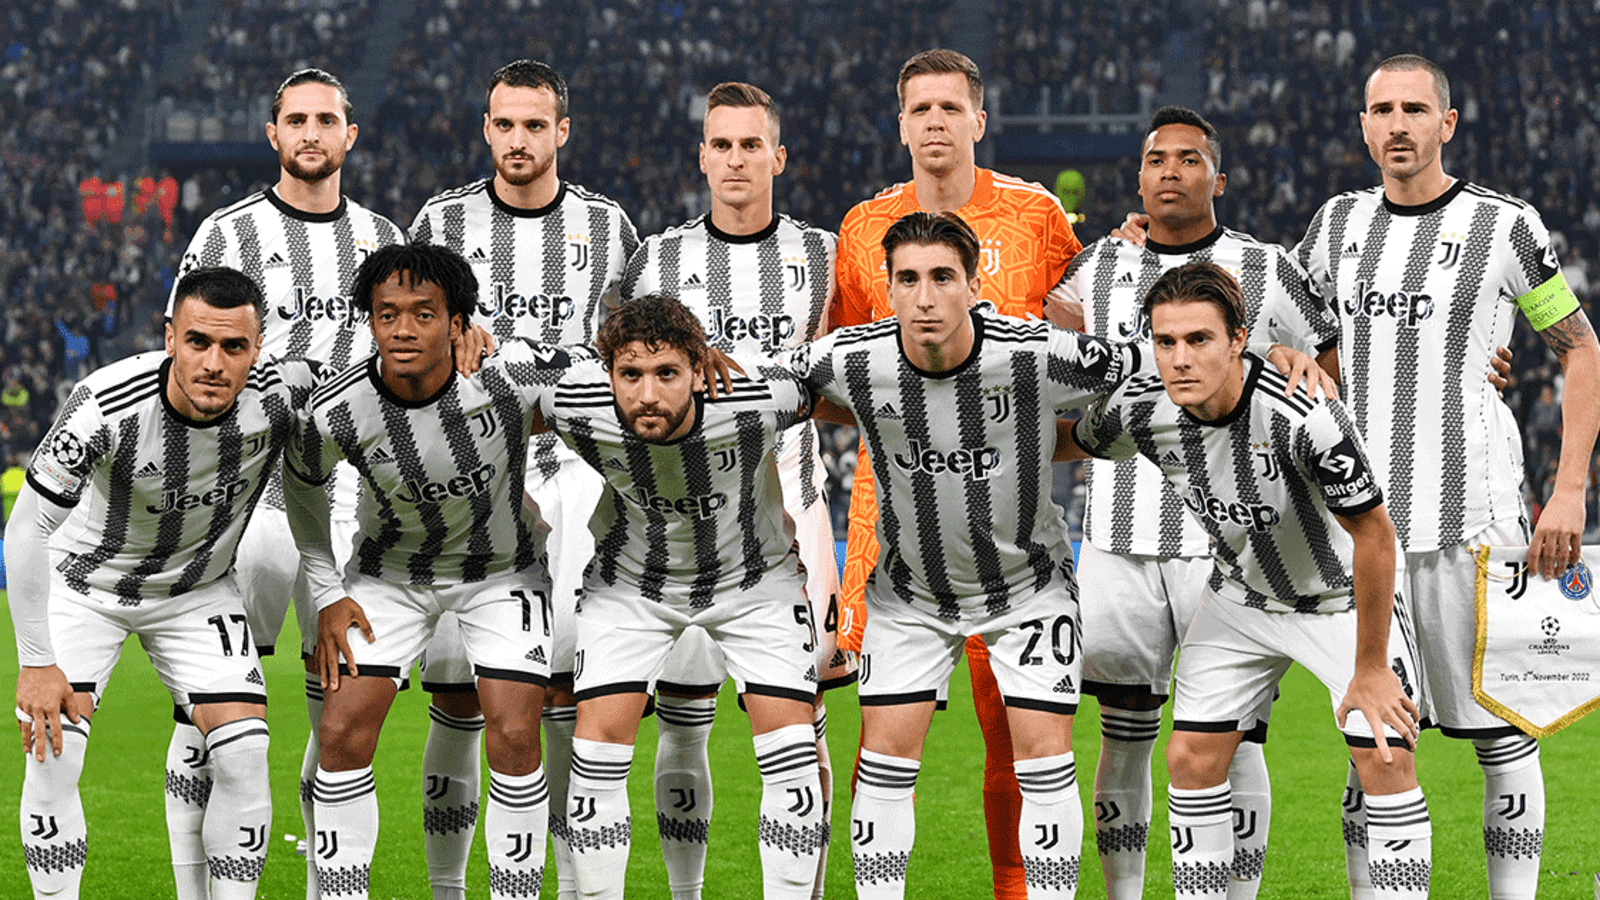 UEFA May Suspend Juventus from European Competitions for Several Years